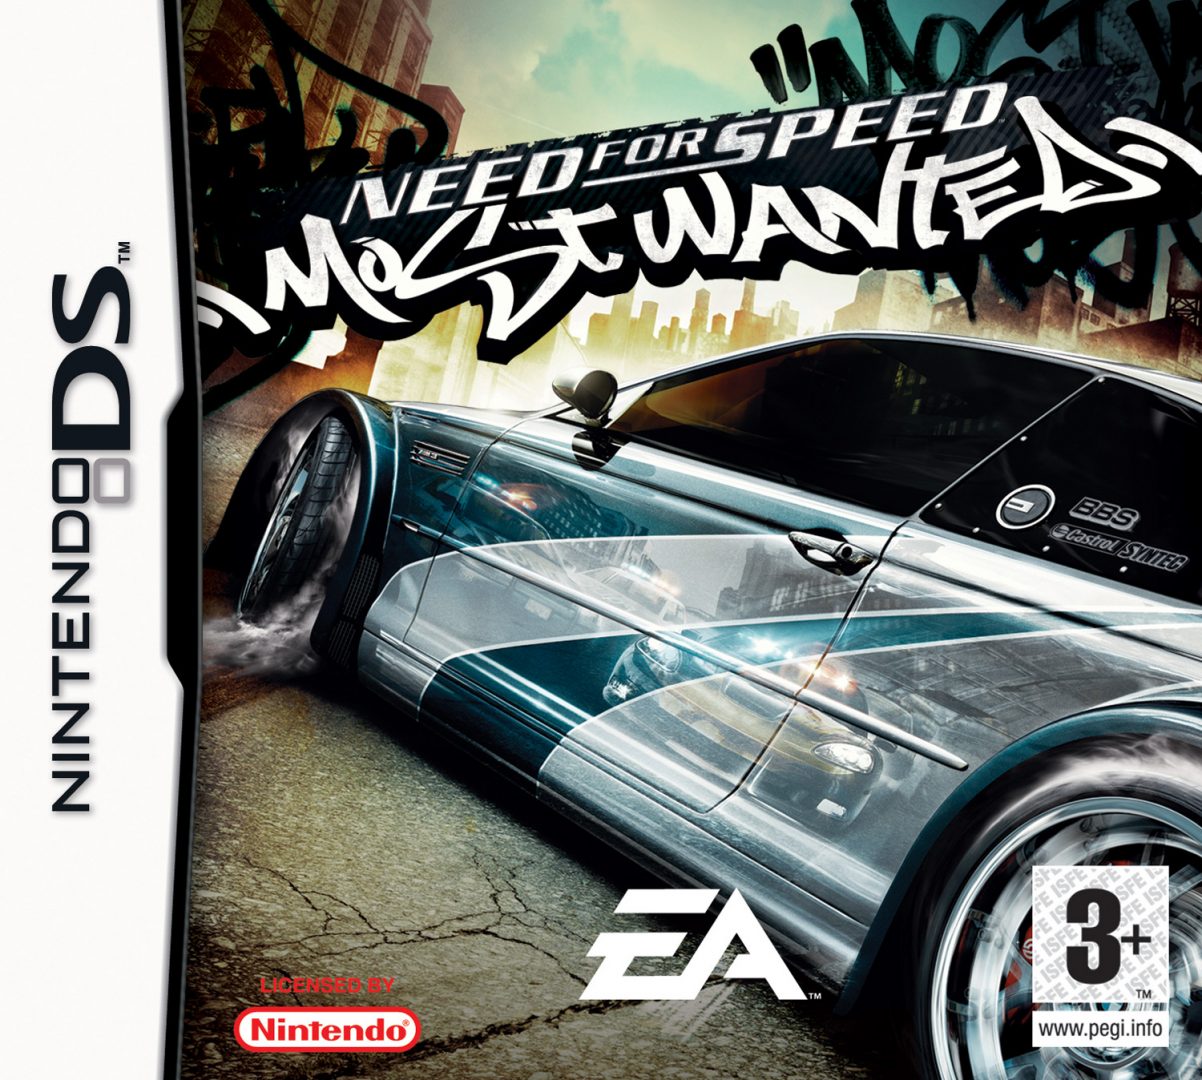 The coverart image of Need for Speed: Most Wanted